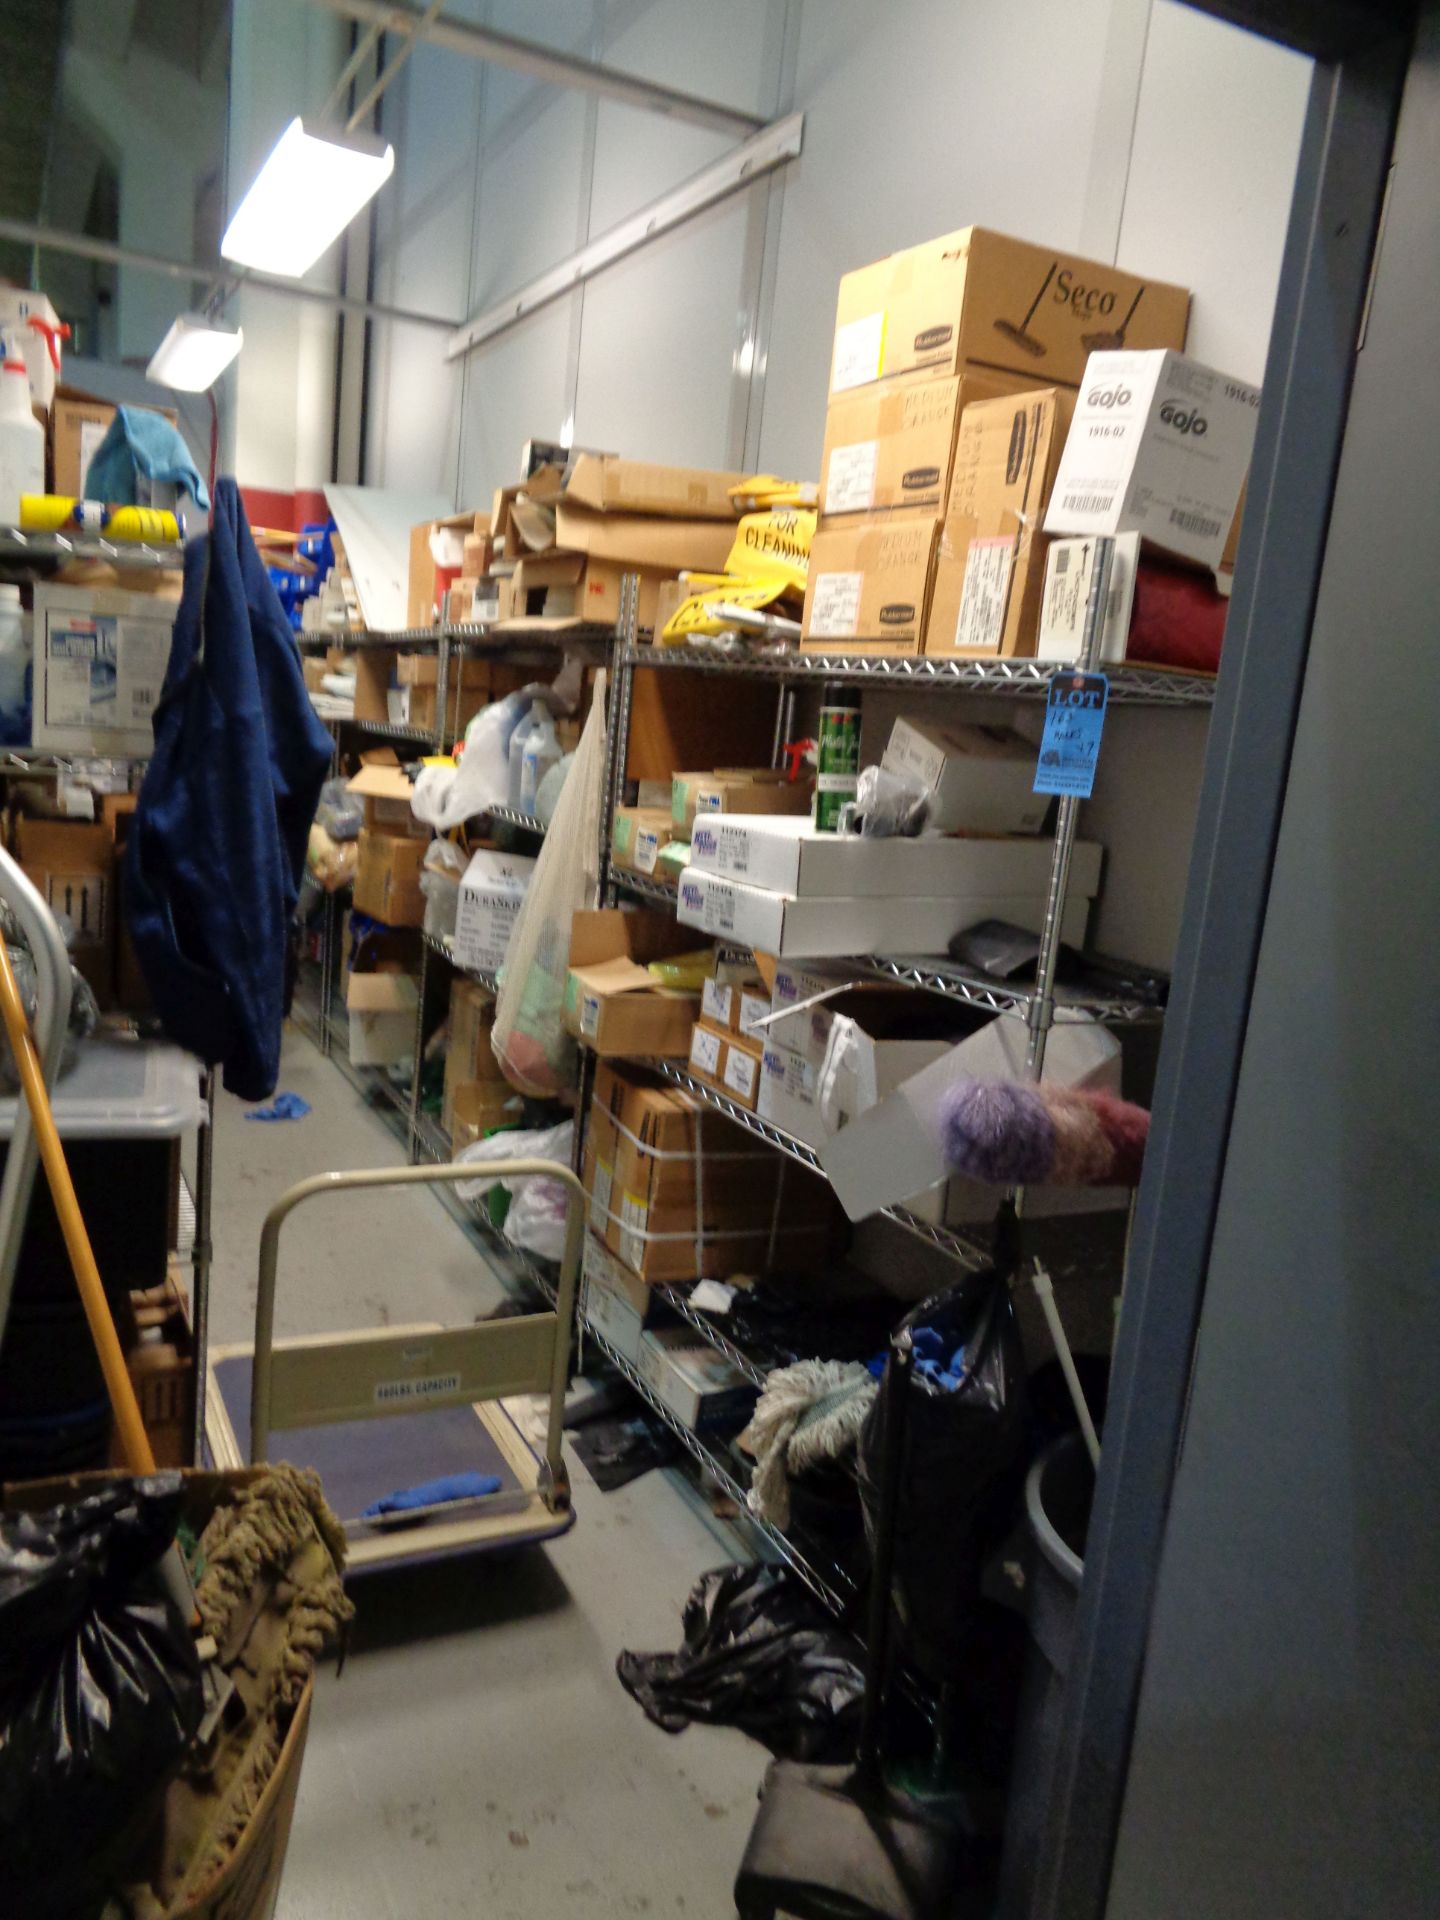 (LOT) ASSORTED JANATORAL SUPPLIES IN STORAGE ROOM - DOES NOT INCLUDE AFFIXED ELECTRONICS ON BACK